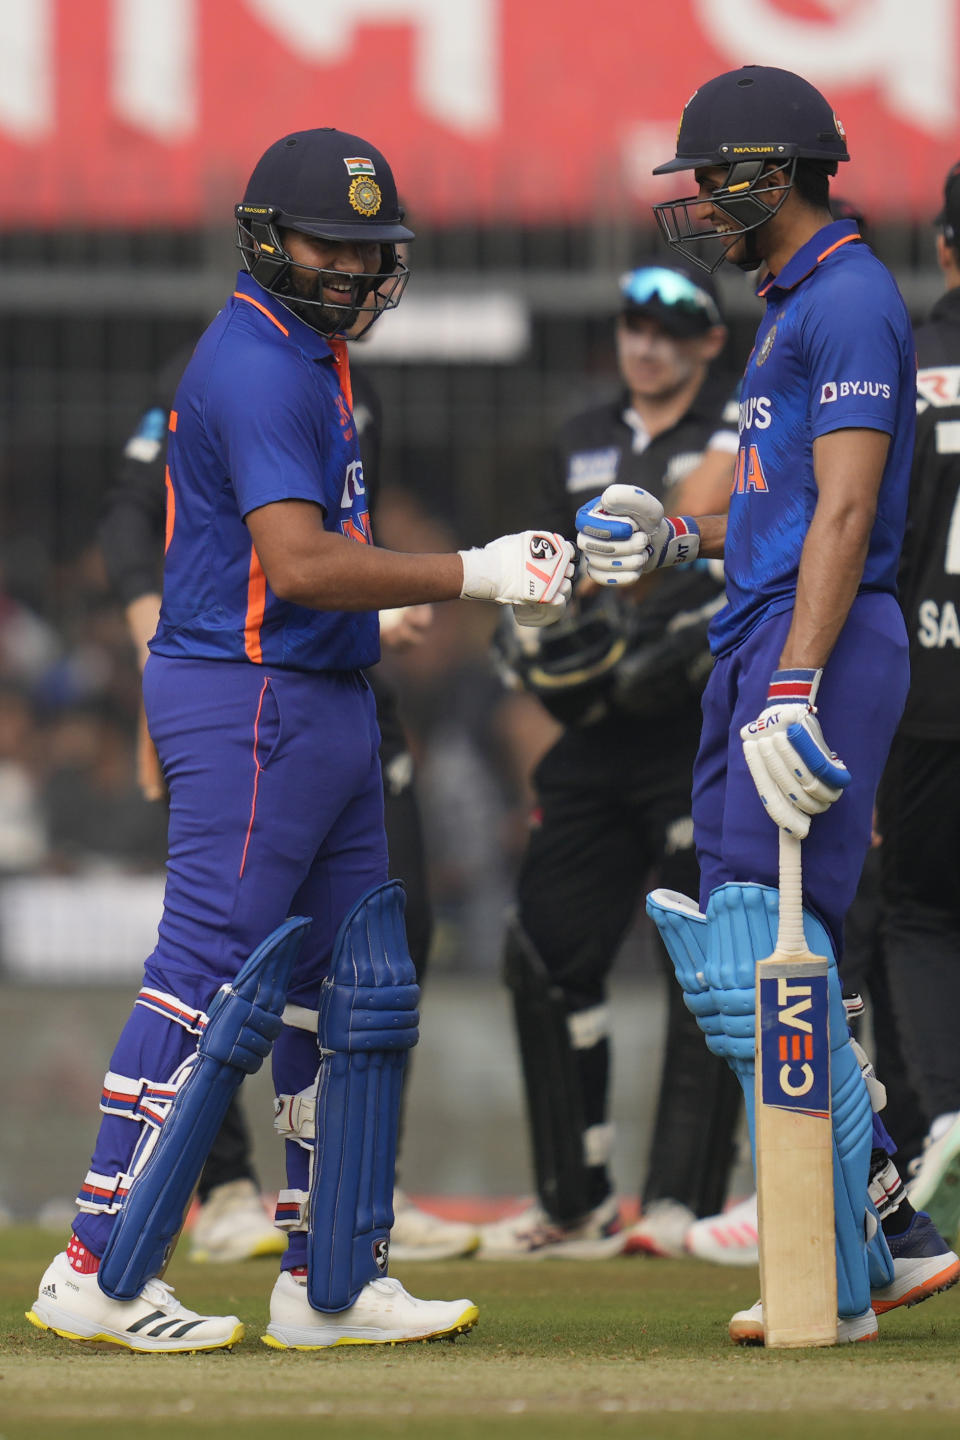 Shubman Gill, right, greets India's captain Rohit Sharma after scoring century during the third one-day international cricket match between India and New Zealand in Indore, India, Tuesday, Jan. 24, 2023. (AP Photo/Rajanish Kakade)